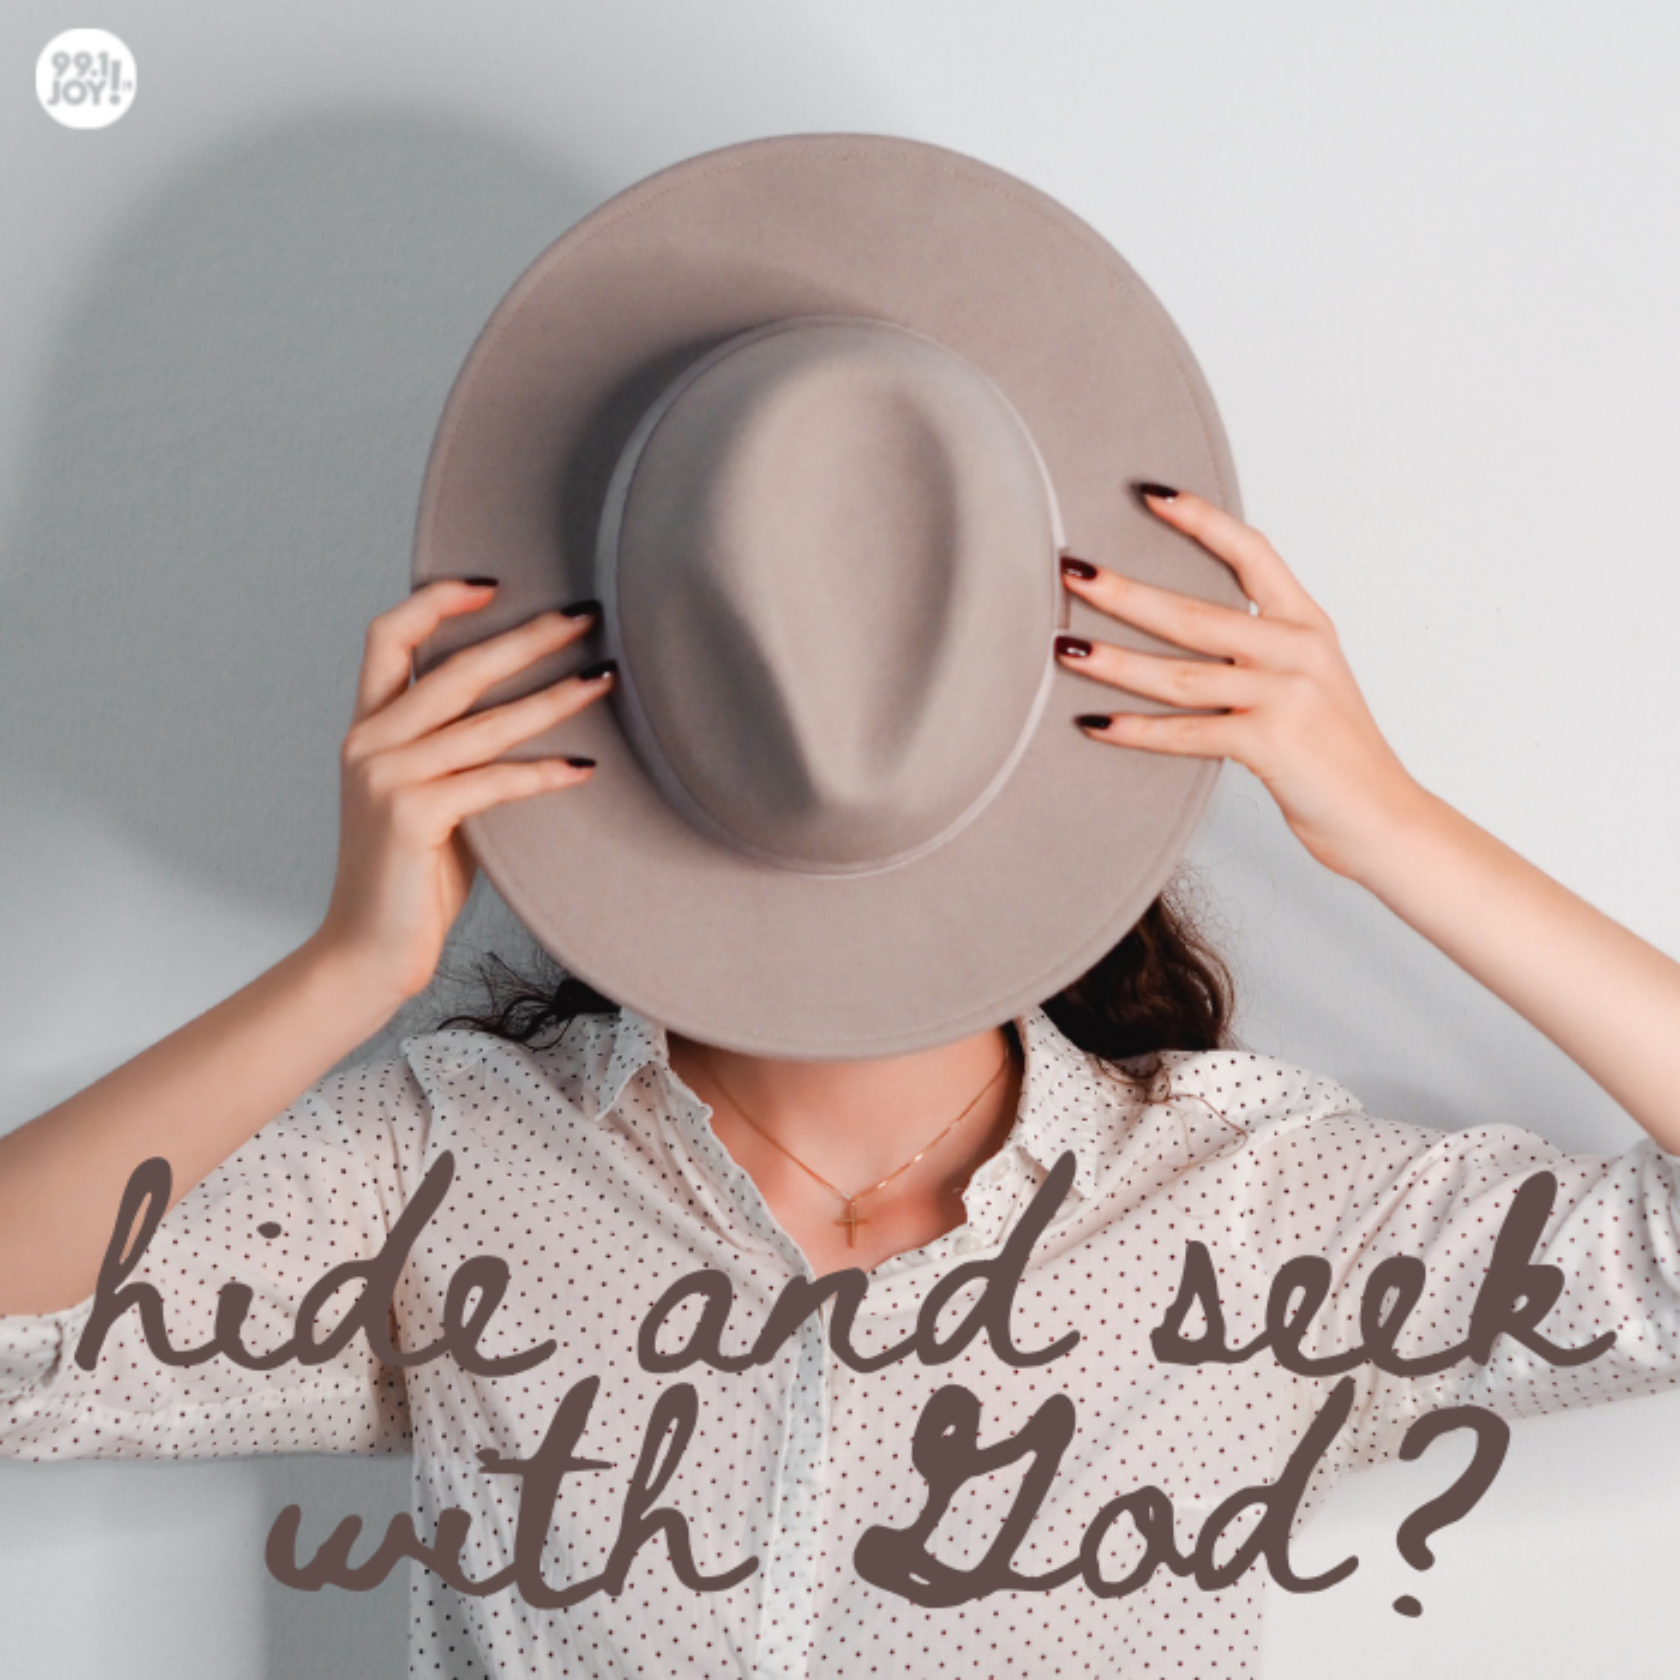 Hide and Seek with God?